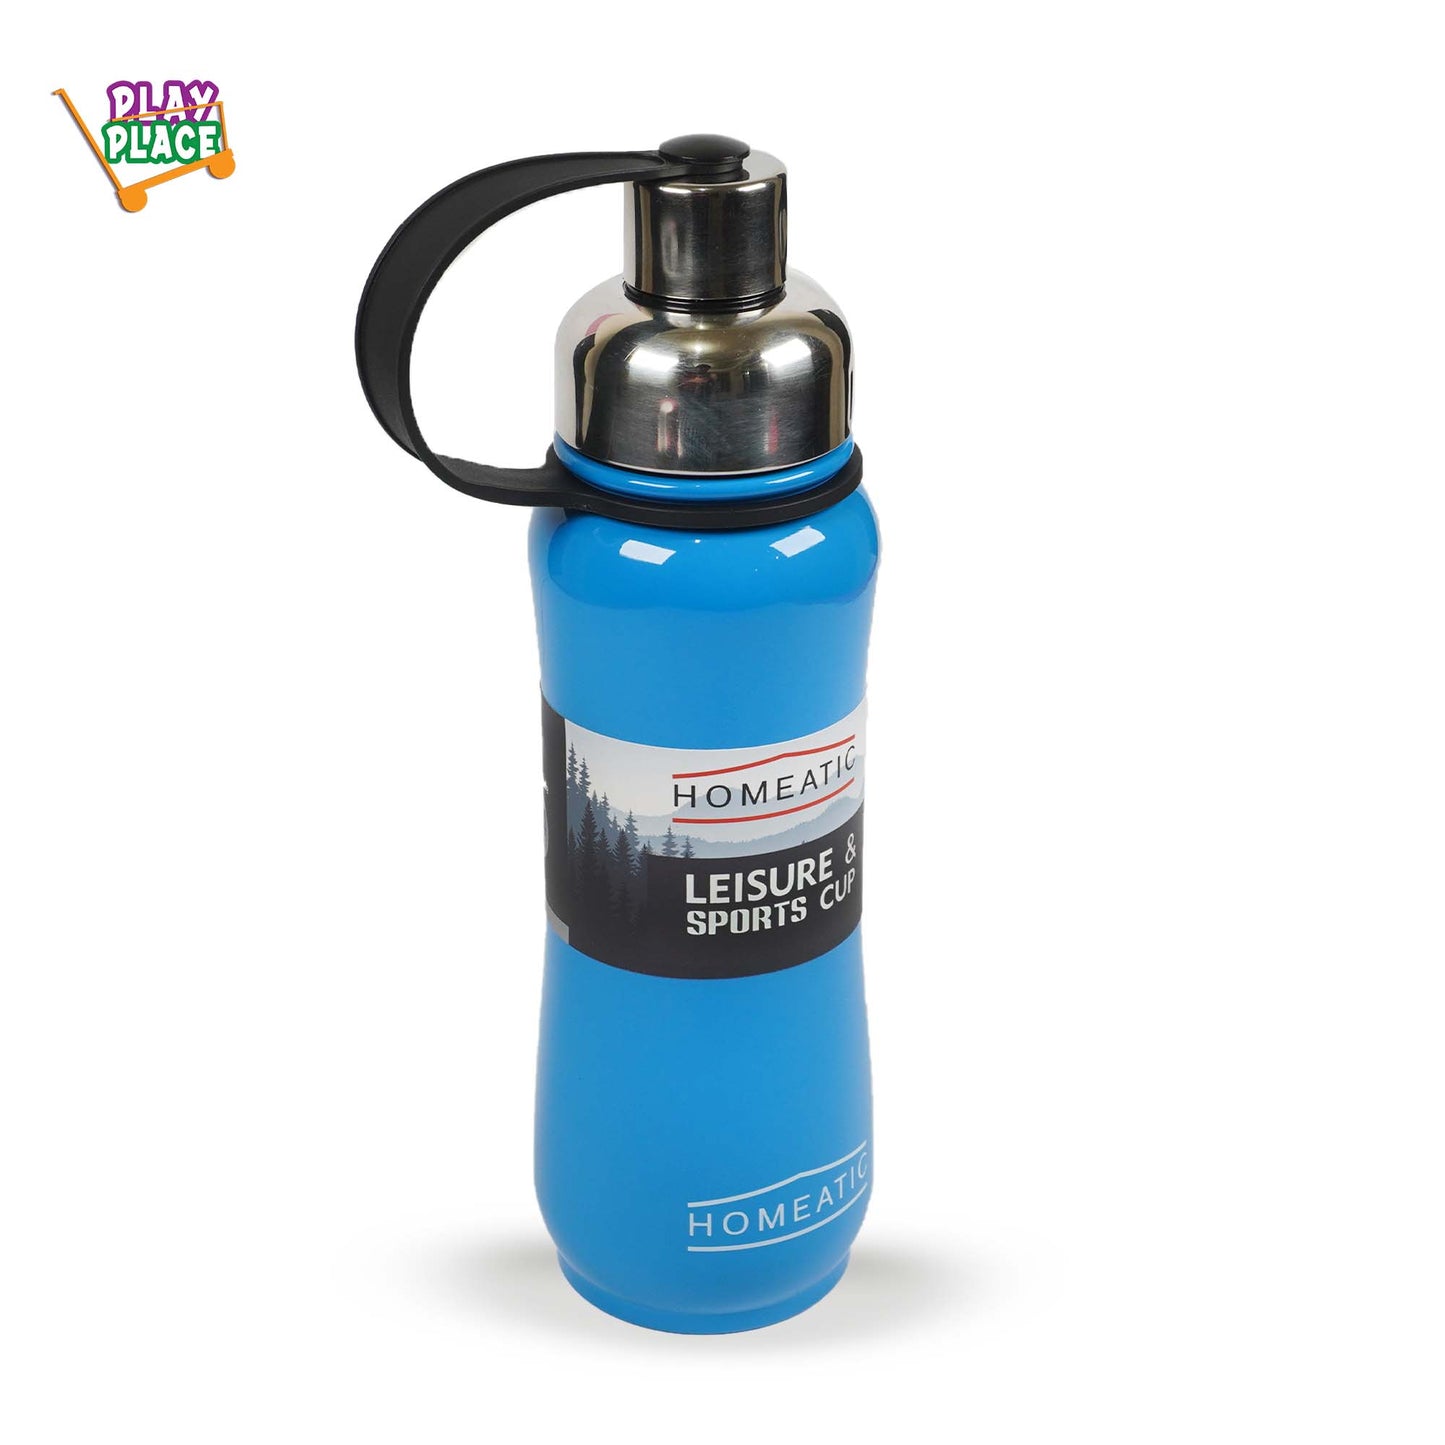 Homeatic Insulated Leasure and Sports Bottle - 500ml (Blue)